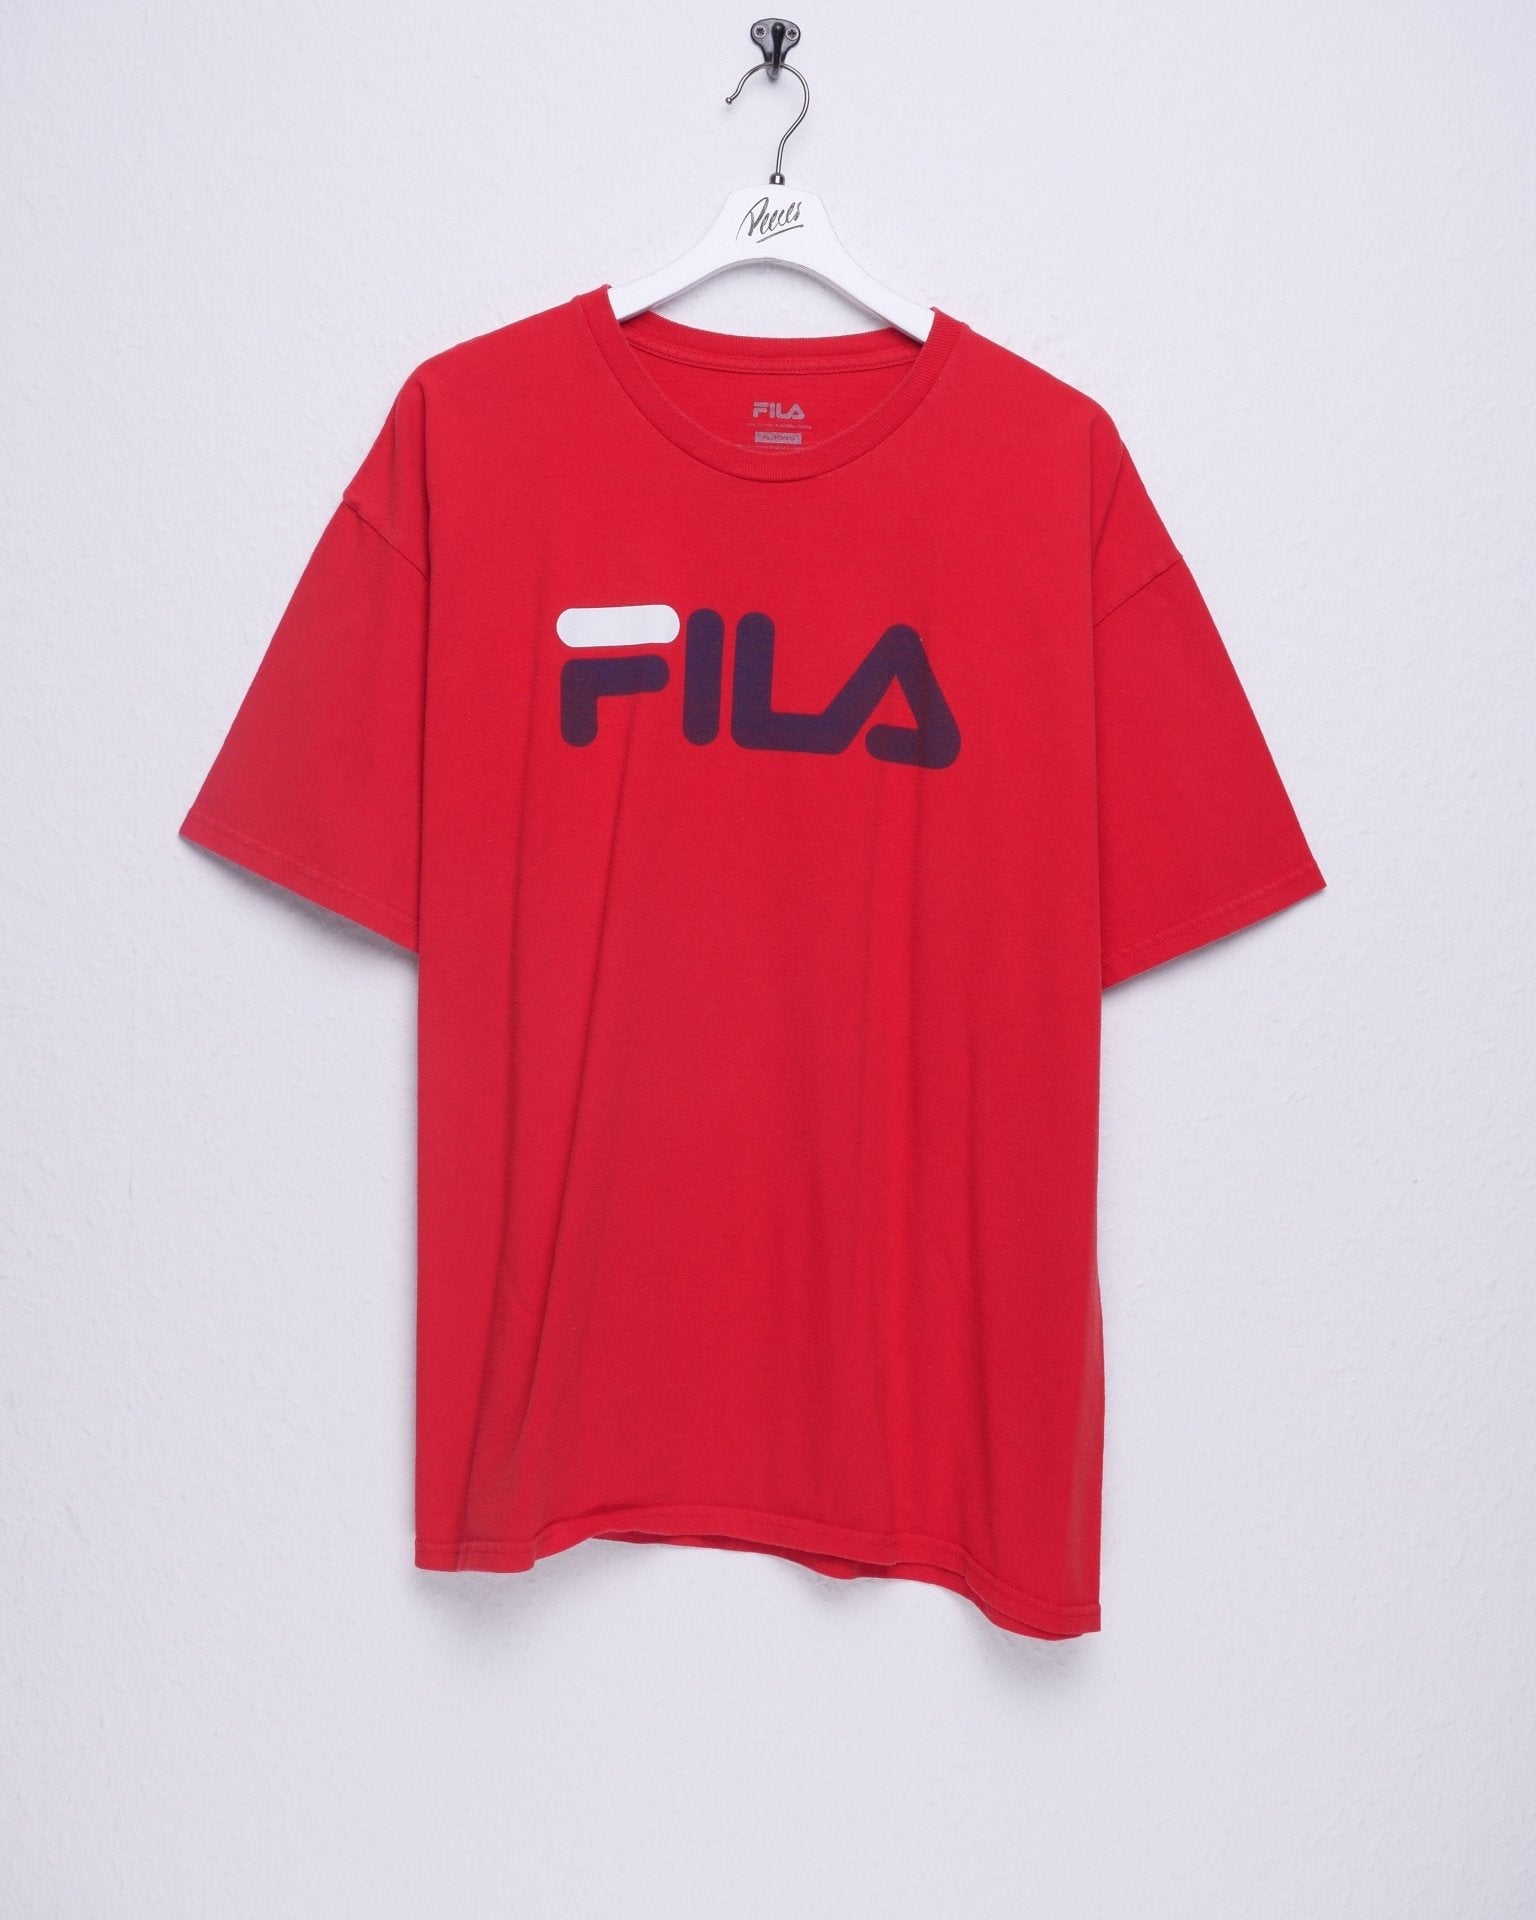 fila printed Spellout red Shirt - Peeces